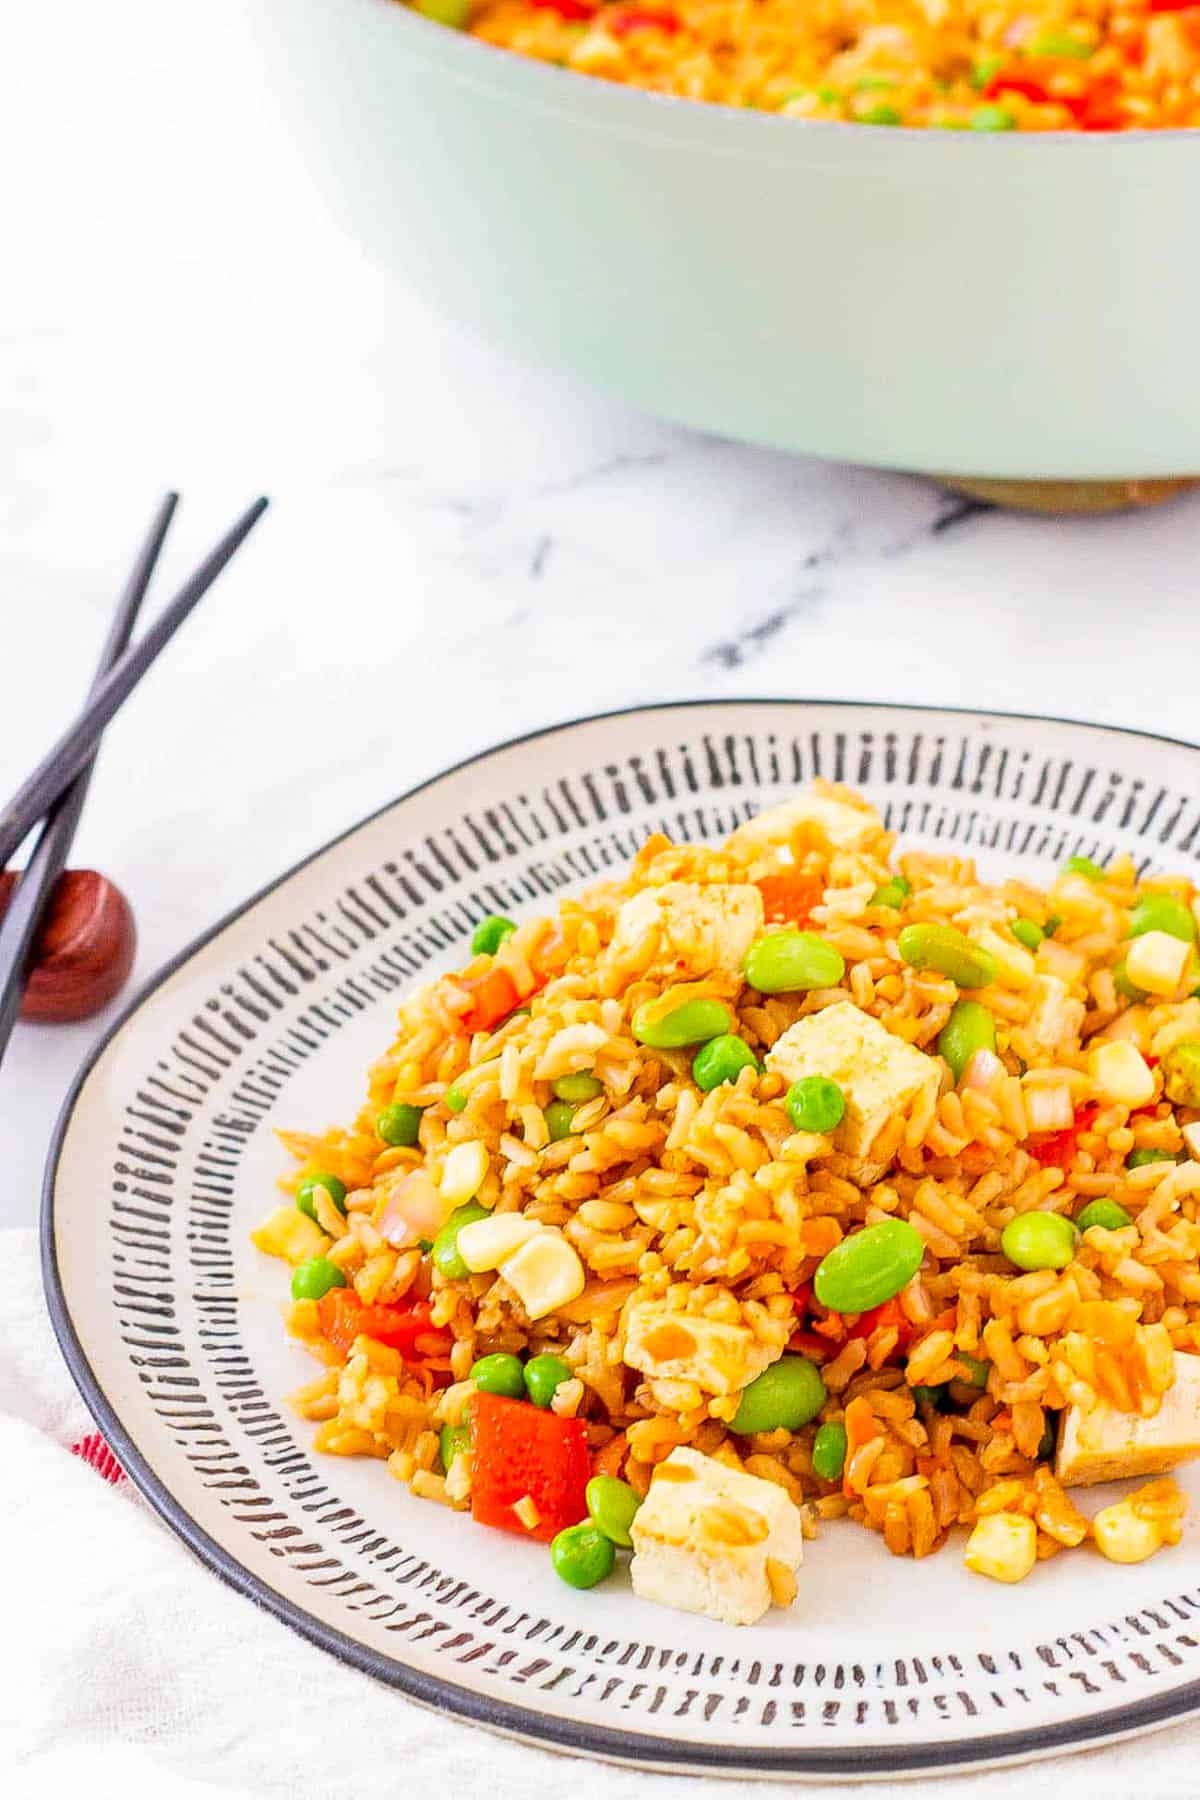 Easy tofu fried rice with vegetables, served on a white plate.